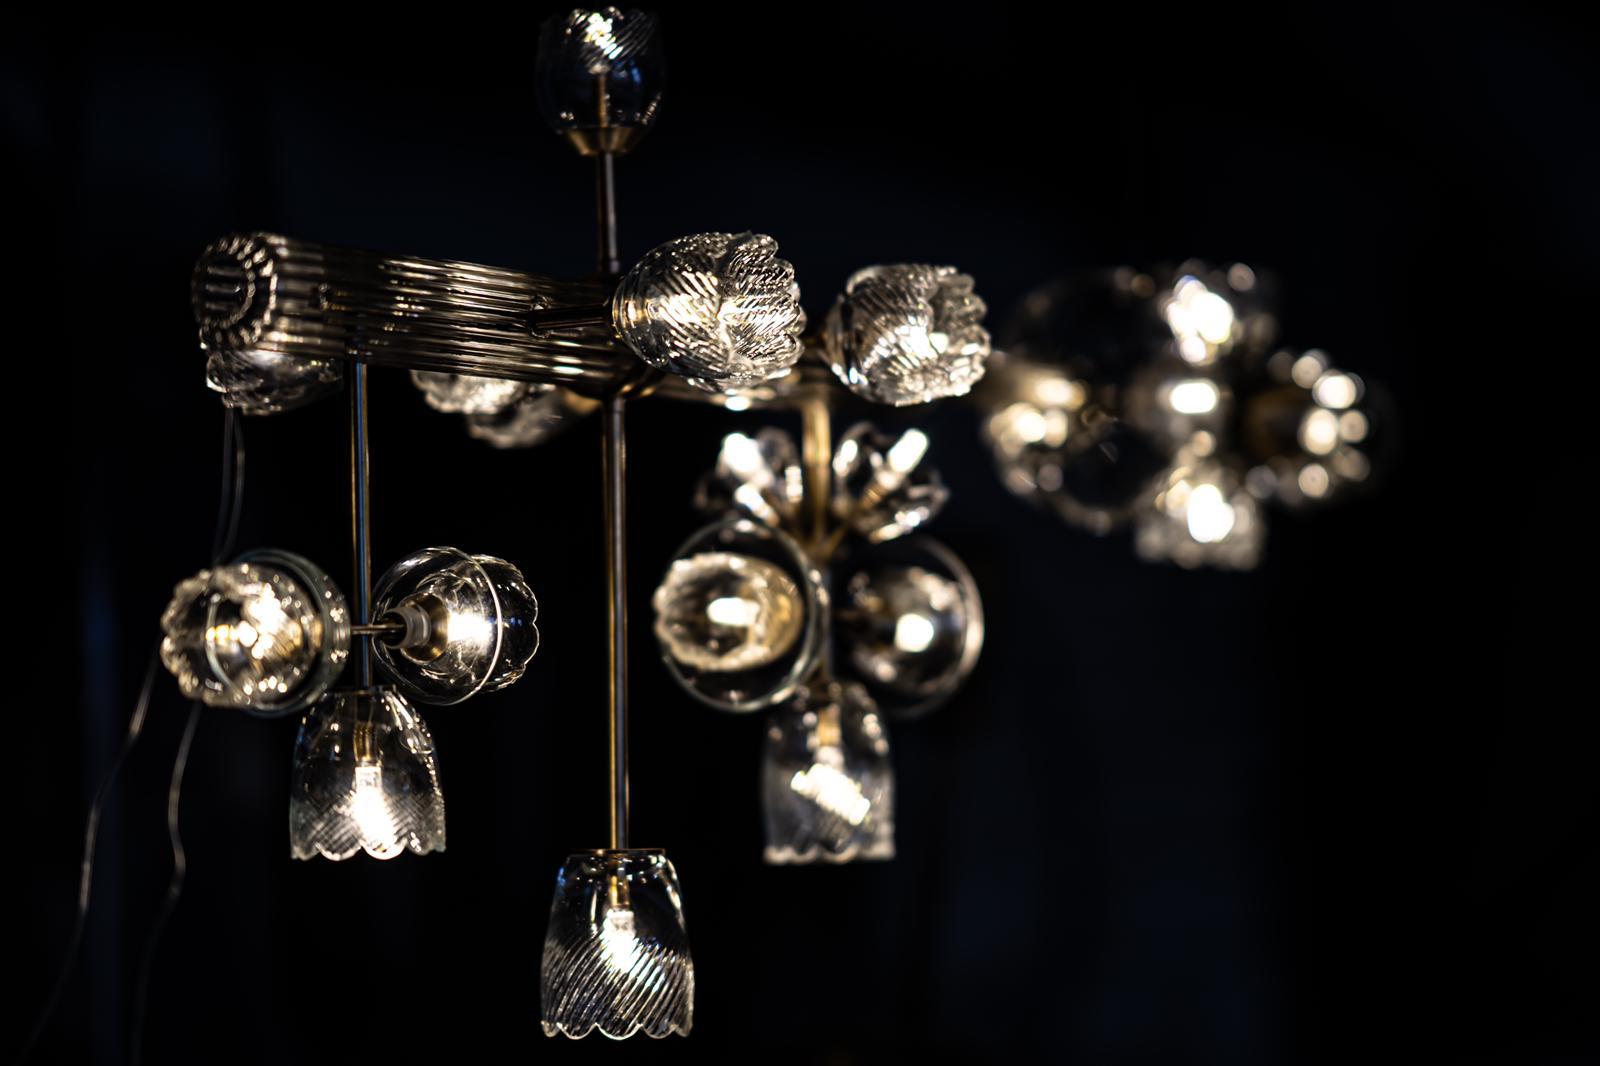 Welded transparent lungo lamp by Sema Topaloglu For Sale